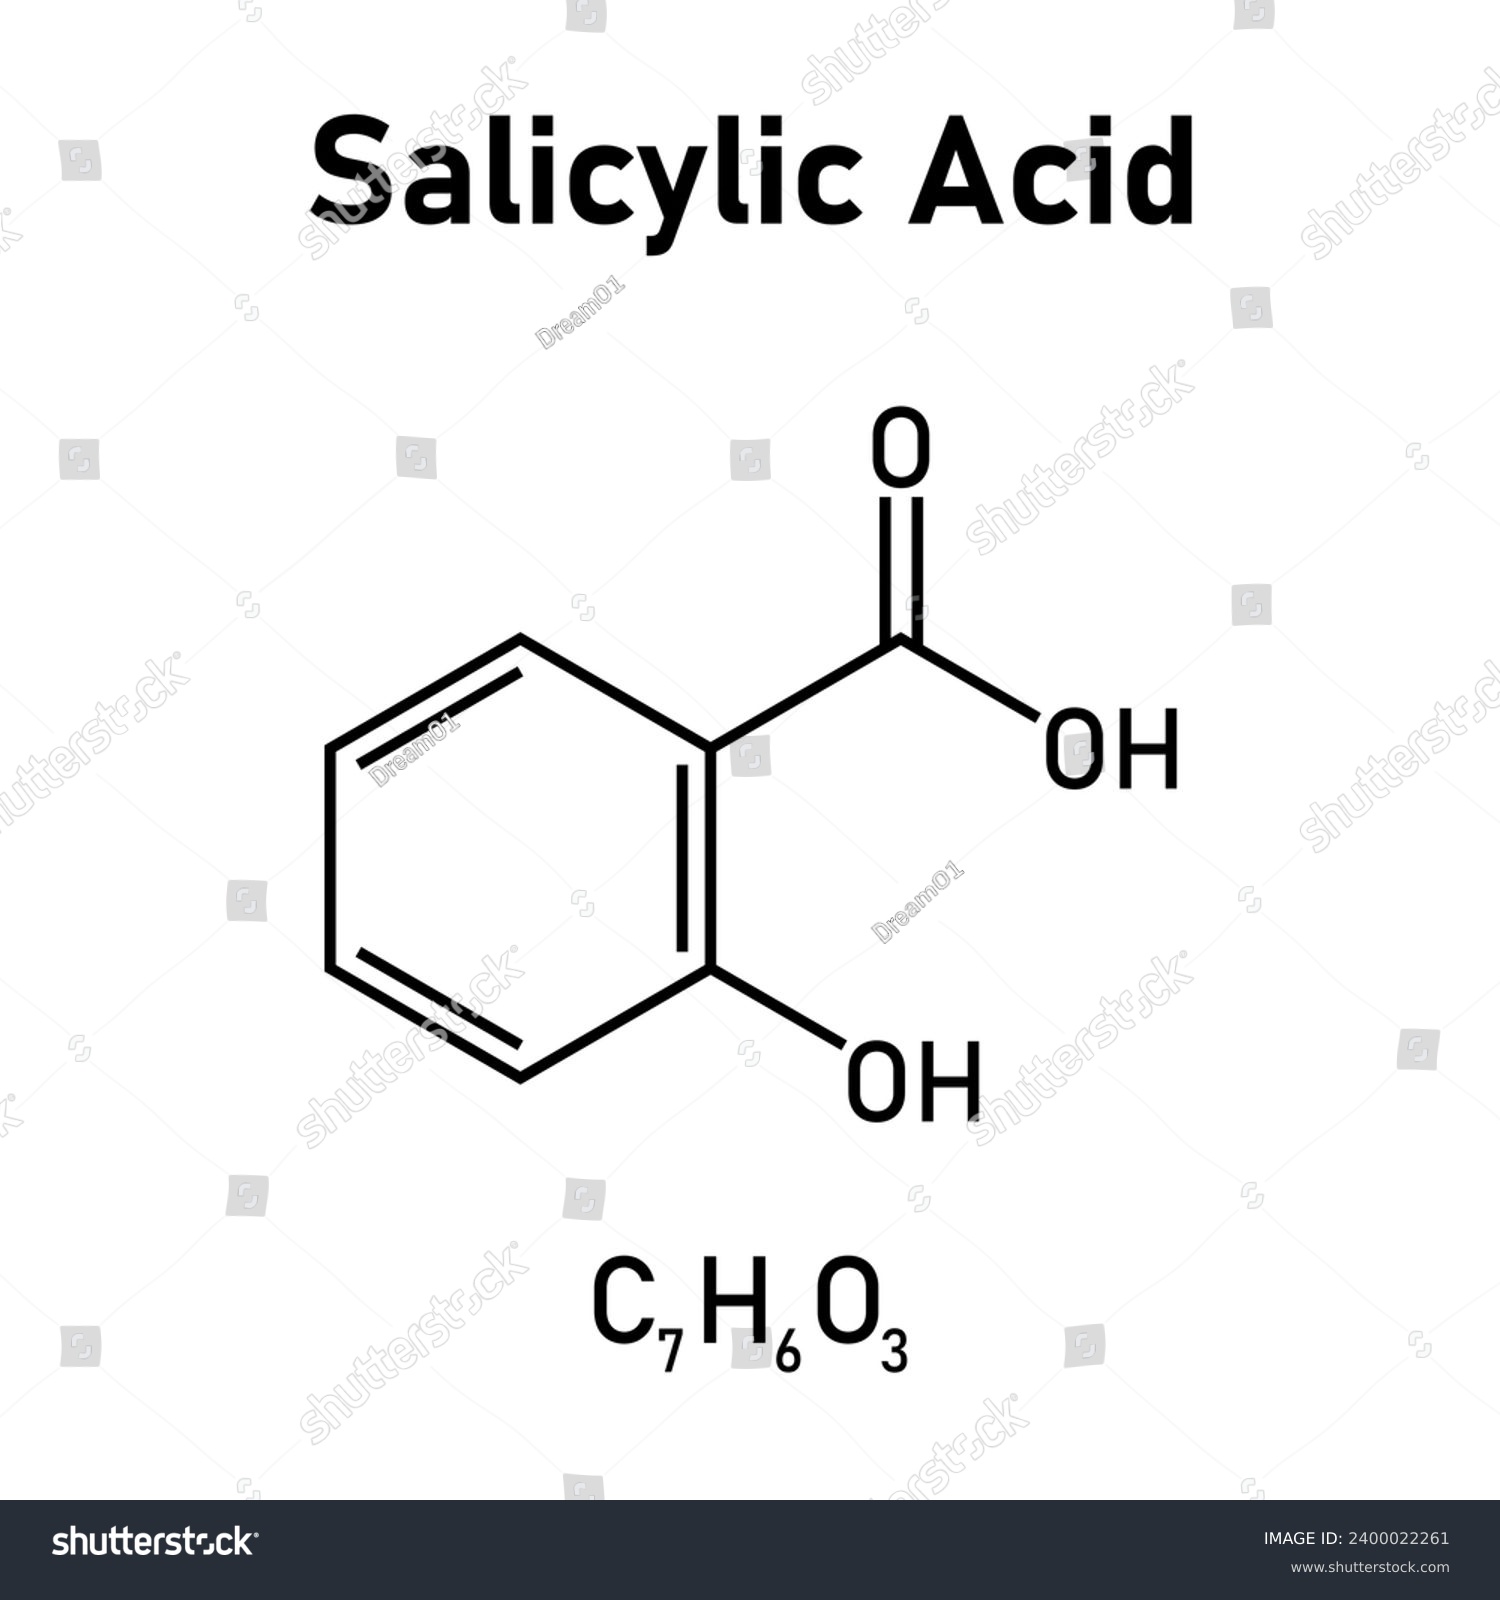 Chemical structure of Salicylic acid (C7H6O3). Chemical resources for teachers and students. Vector illustration. #2400022261